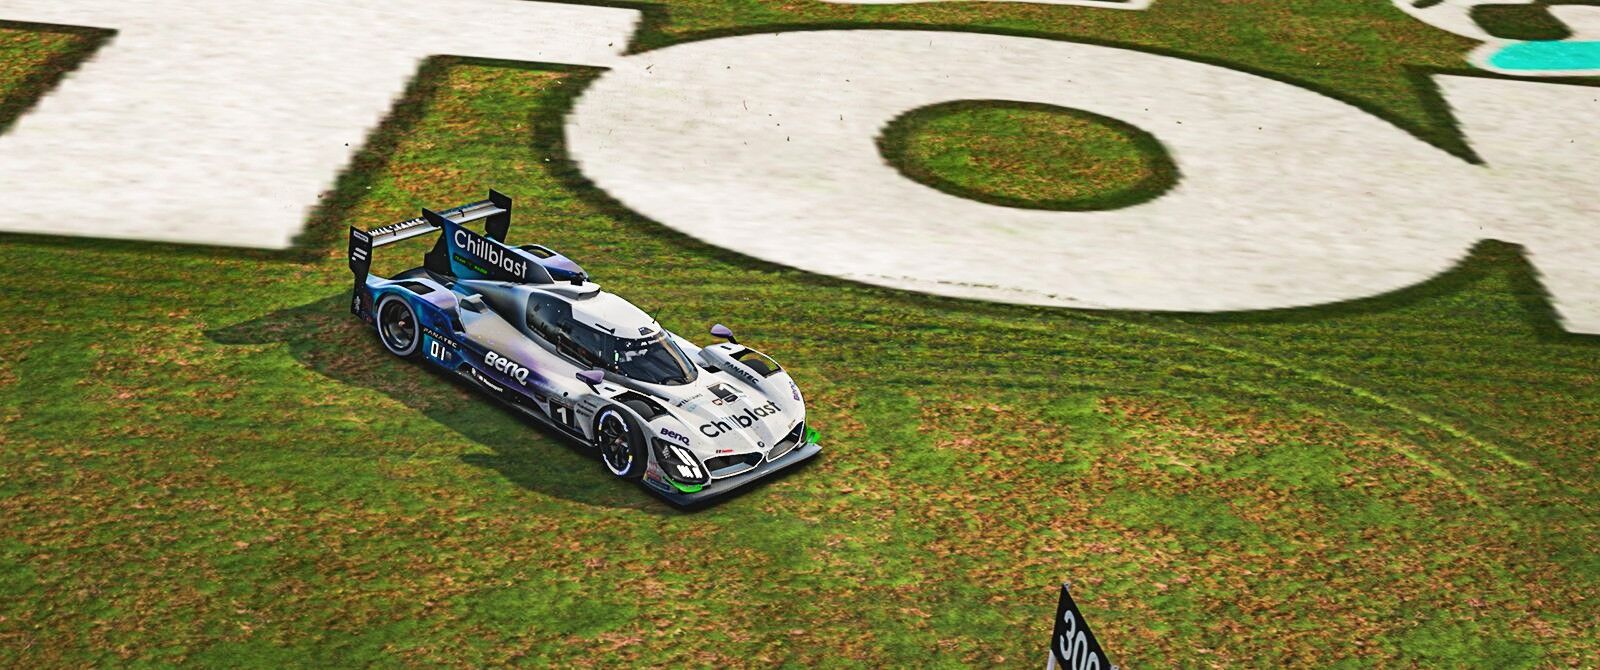 How realistic should simracing esports be? Williams sparked controversy at the iRacing Daytona 24